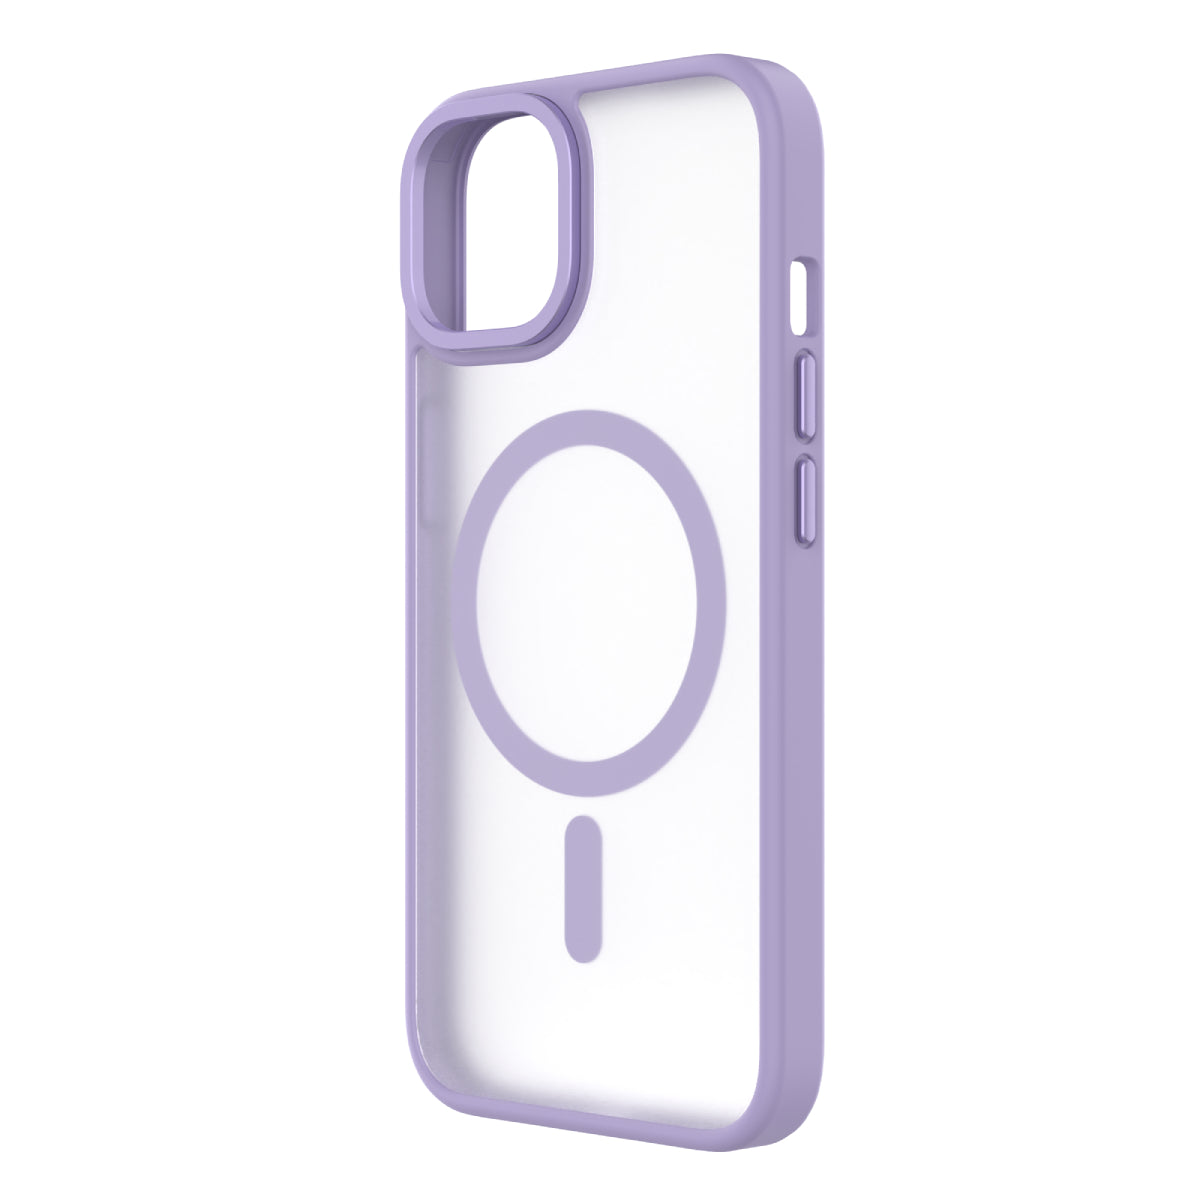 iPhone 14/13 Hybrid Soft + Snap protective case from QDOS in Lavender color TPU frame and clear polycarbonate back showing the back without the iPhone in the case